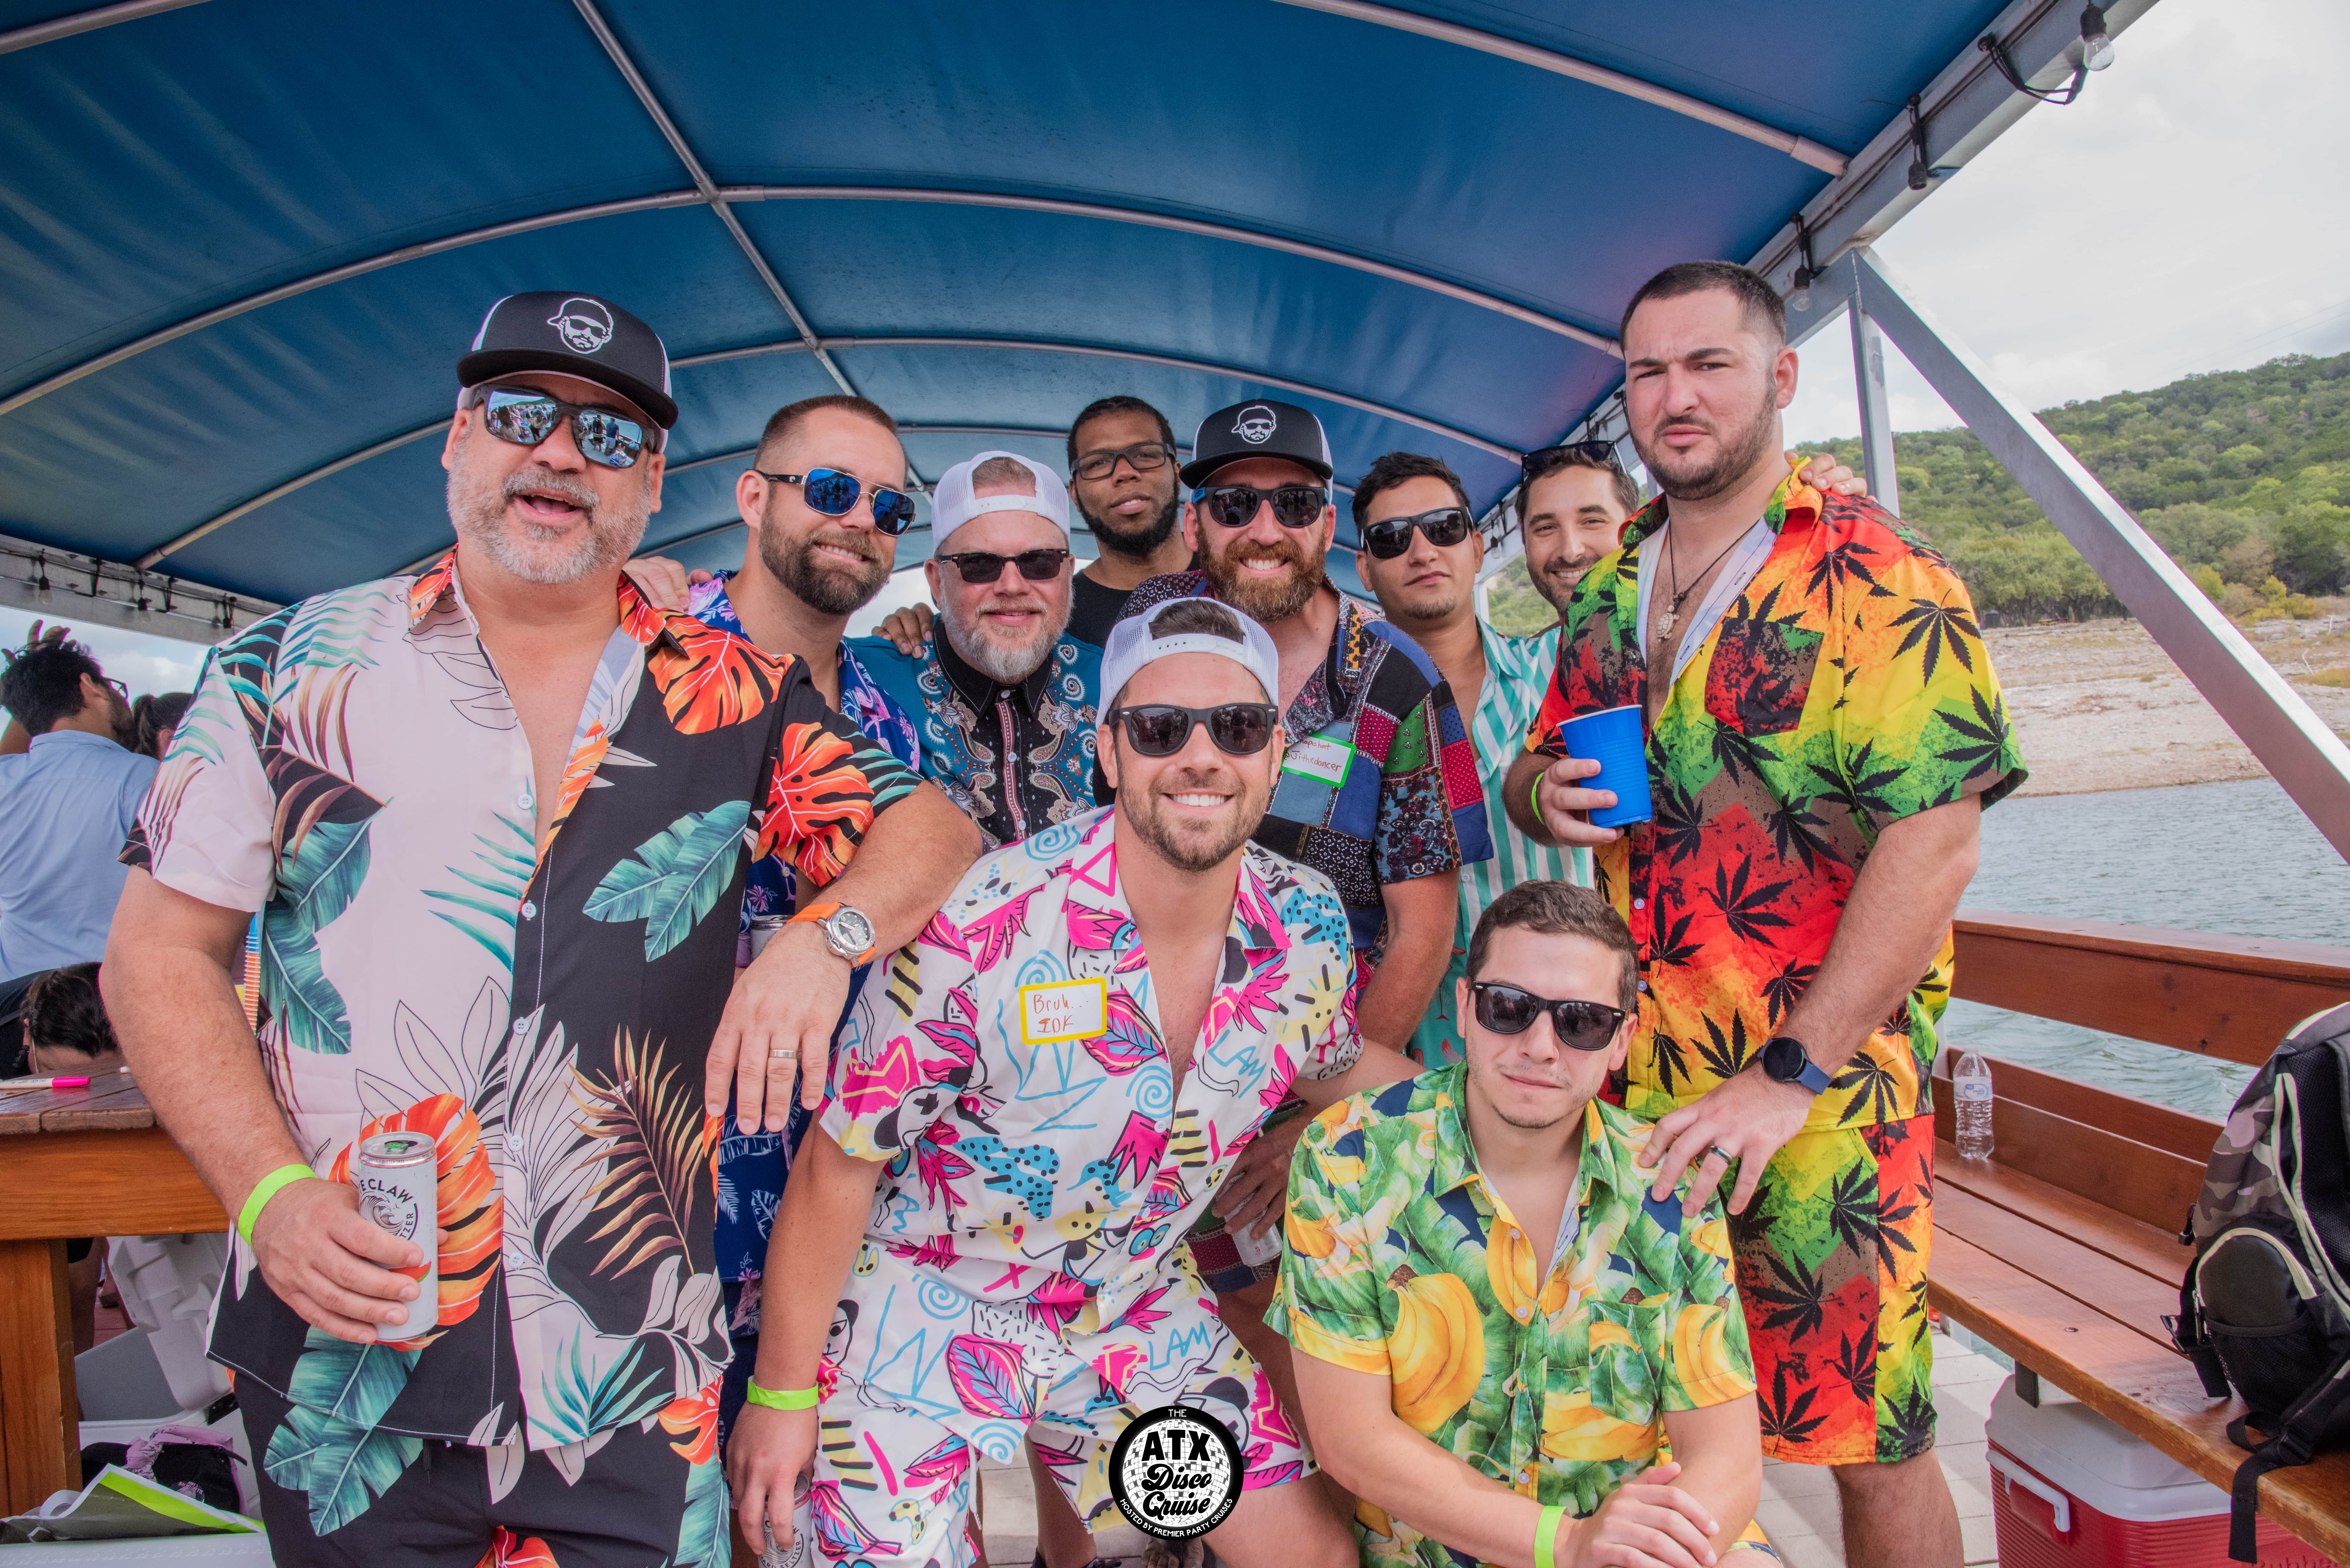 The boys posing for a photo at a bachelorette party in Austin by Premier Party Cruises